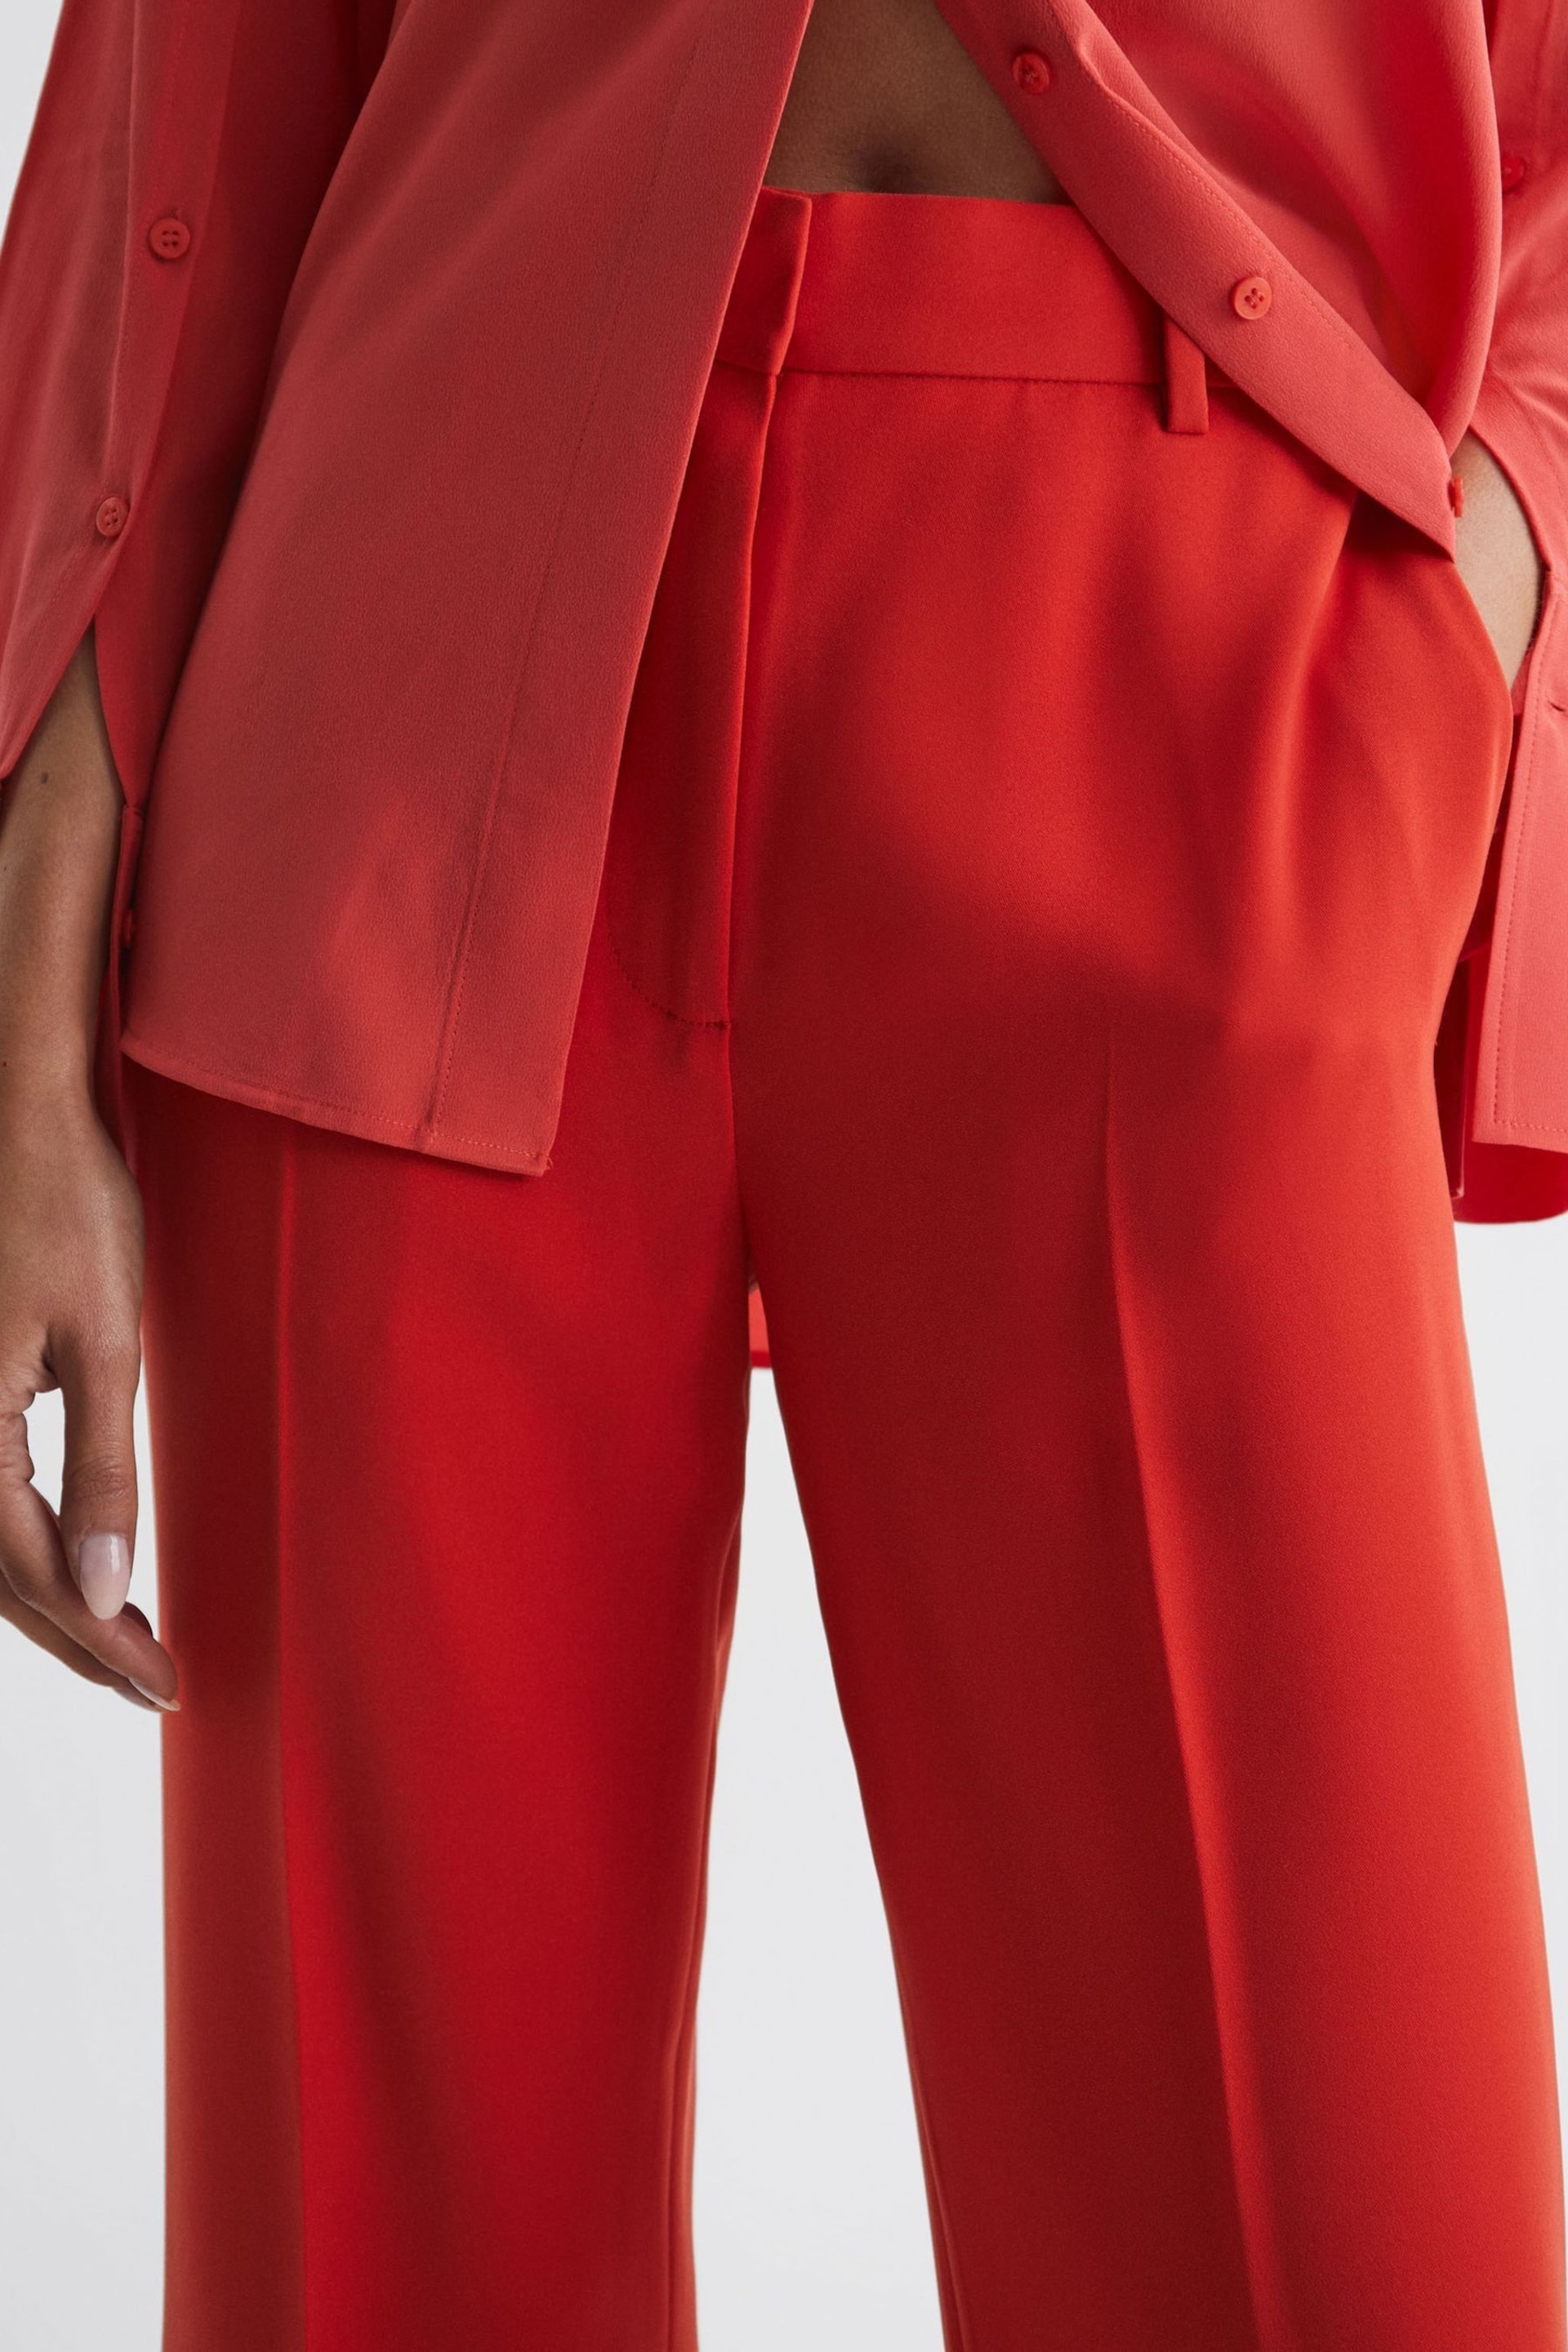 Reiss Coral Maia Wide Leg Trousers - Image 4 of 6